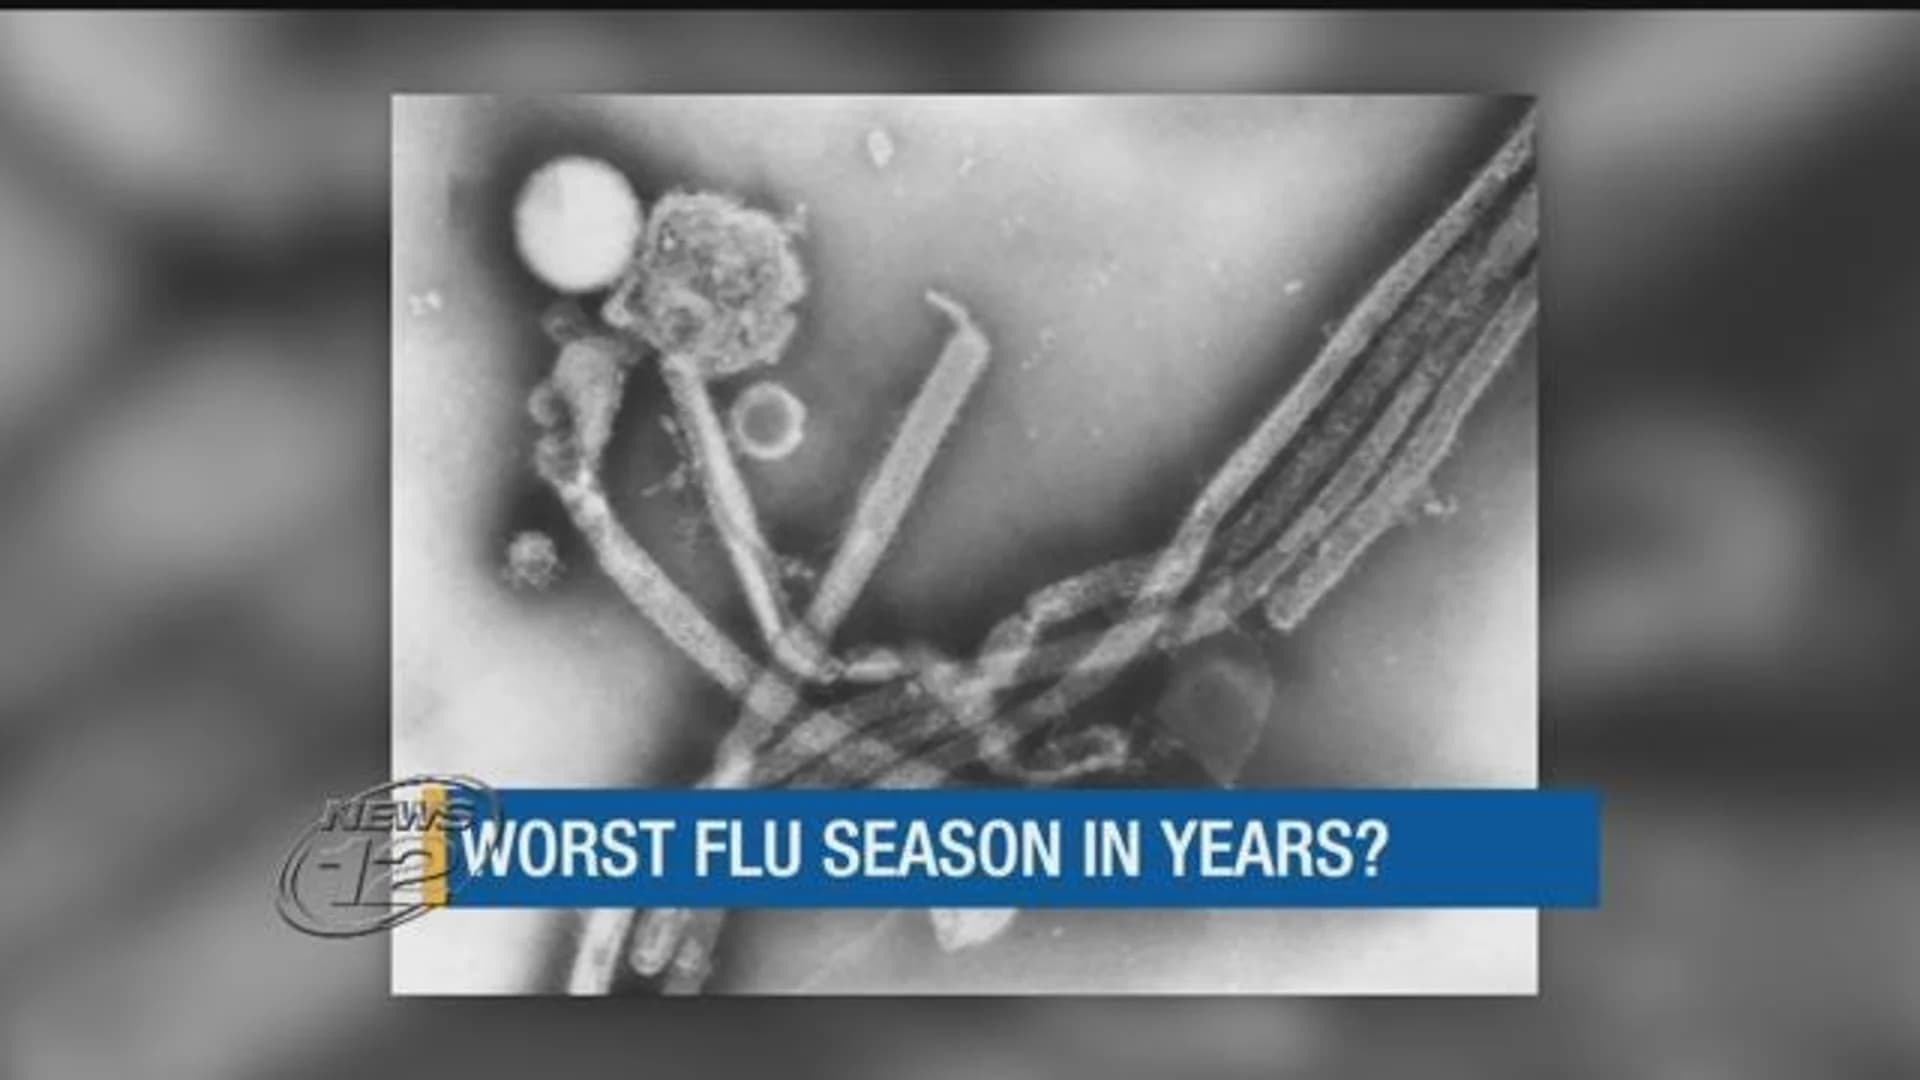 Experts say this year's flu season could be the worst in years